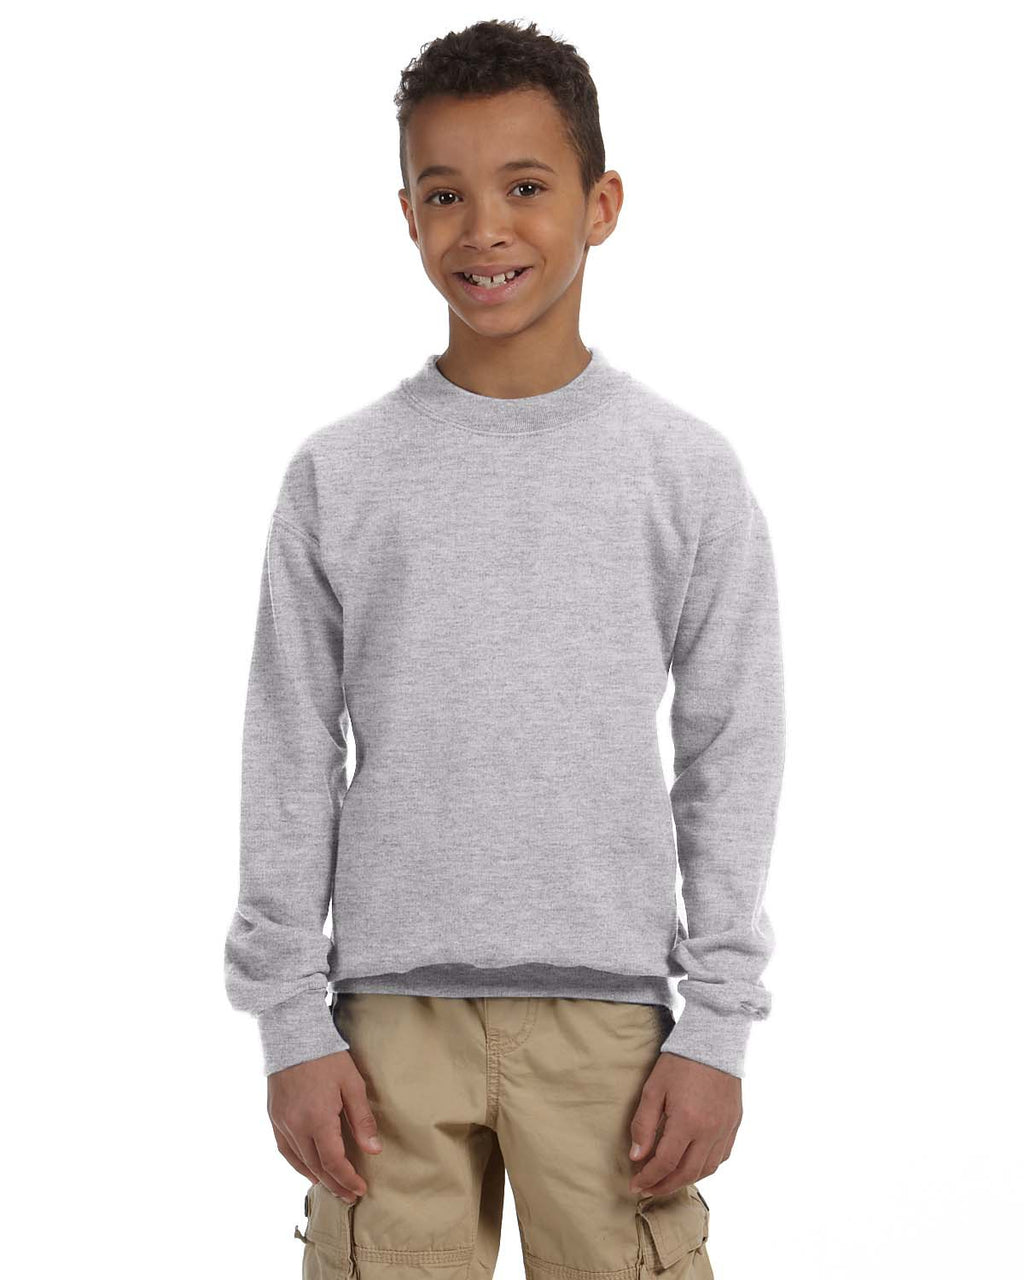 Youth Crewneck Sweater (all the design options) - andoveco